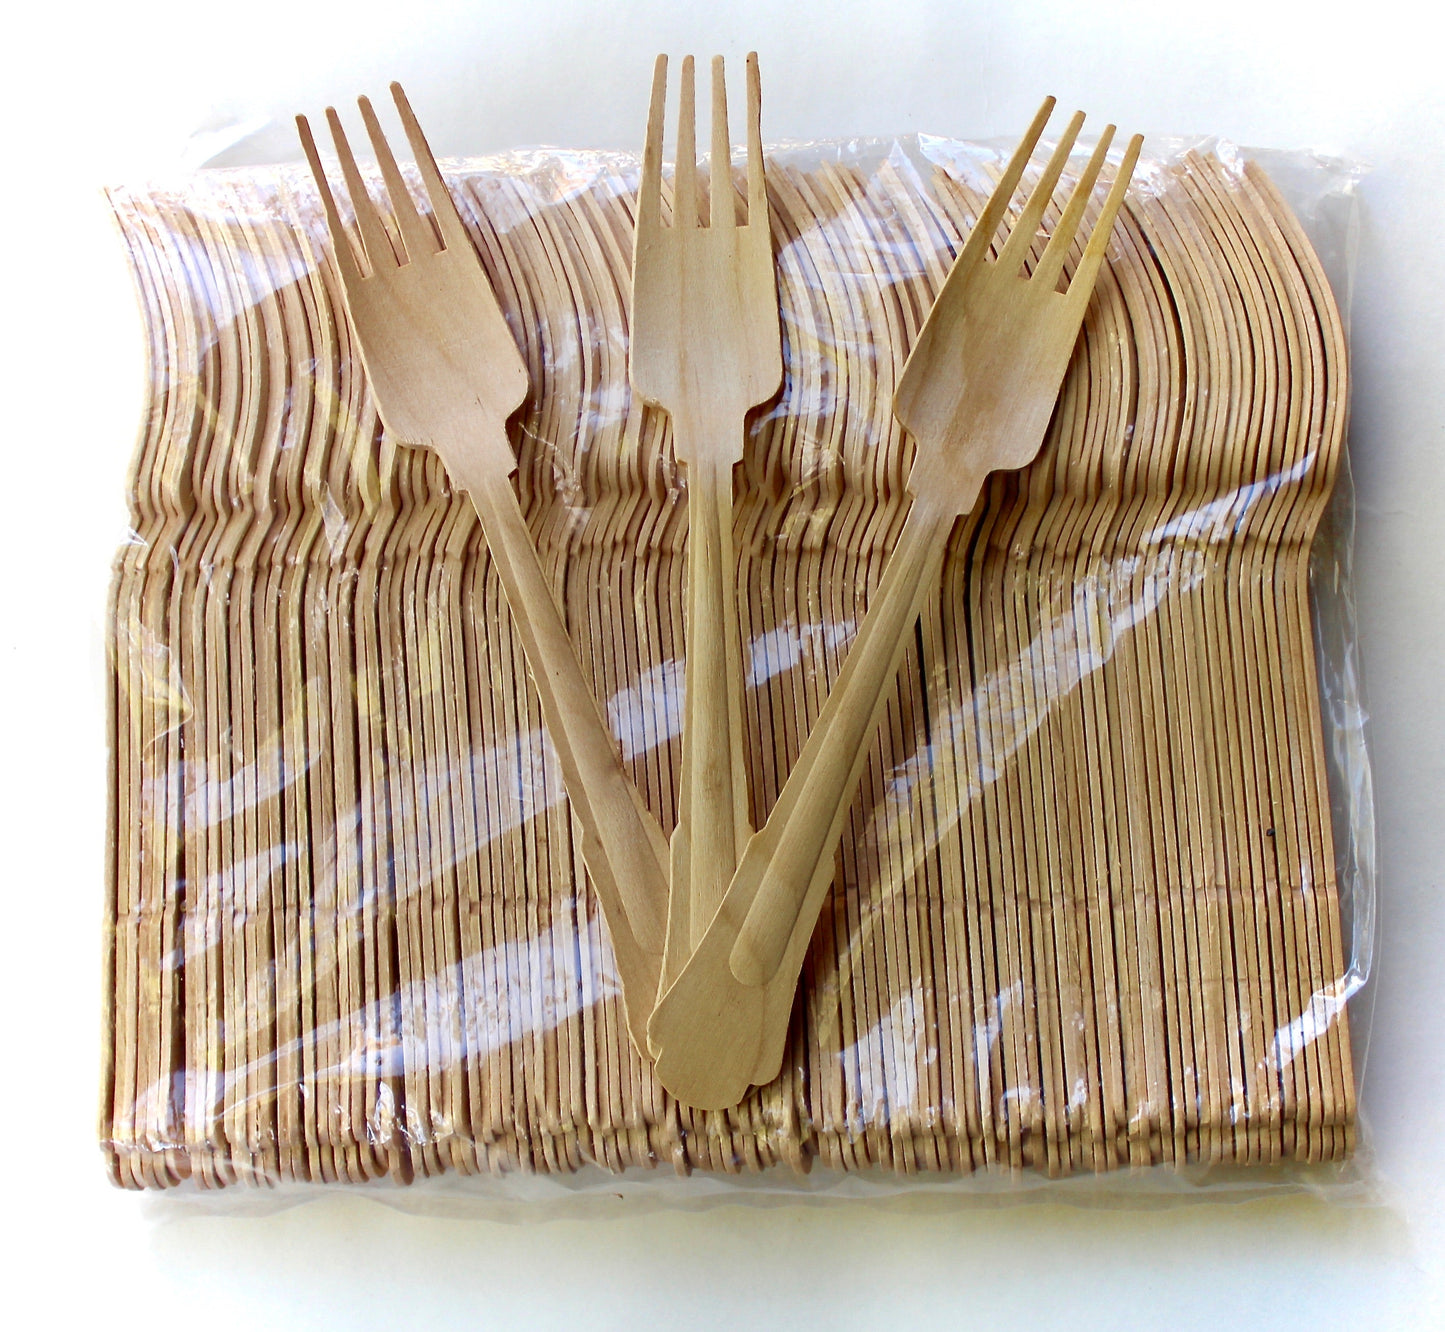 Copy of Disposable 100 Pic each Fork - Knife - Spoon - wooden Birch Utensils